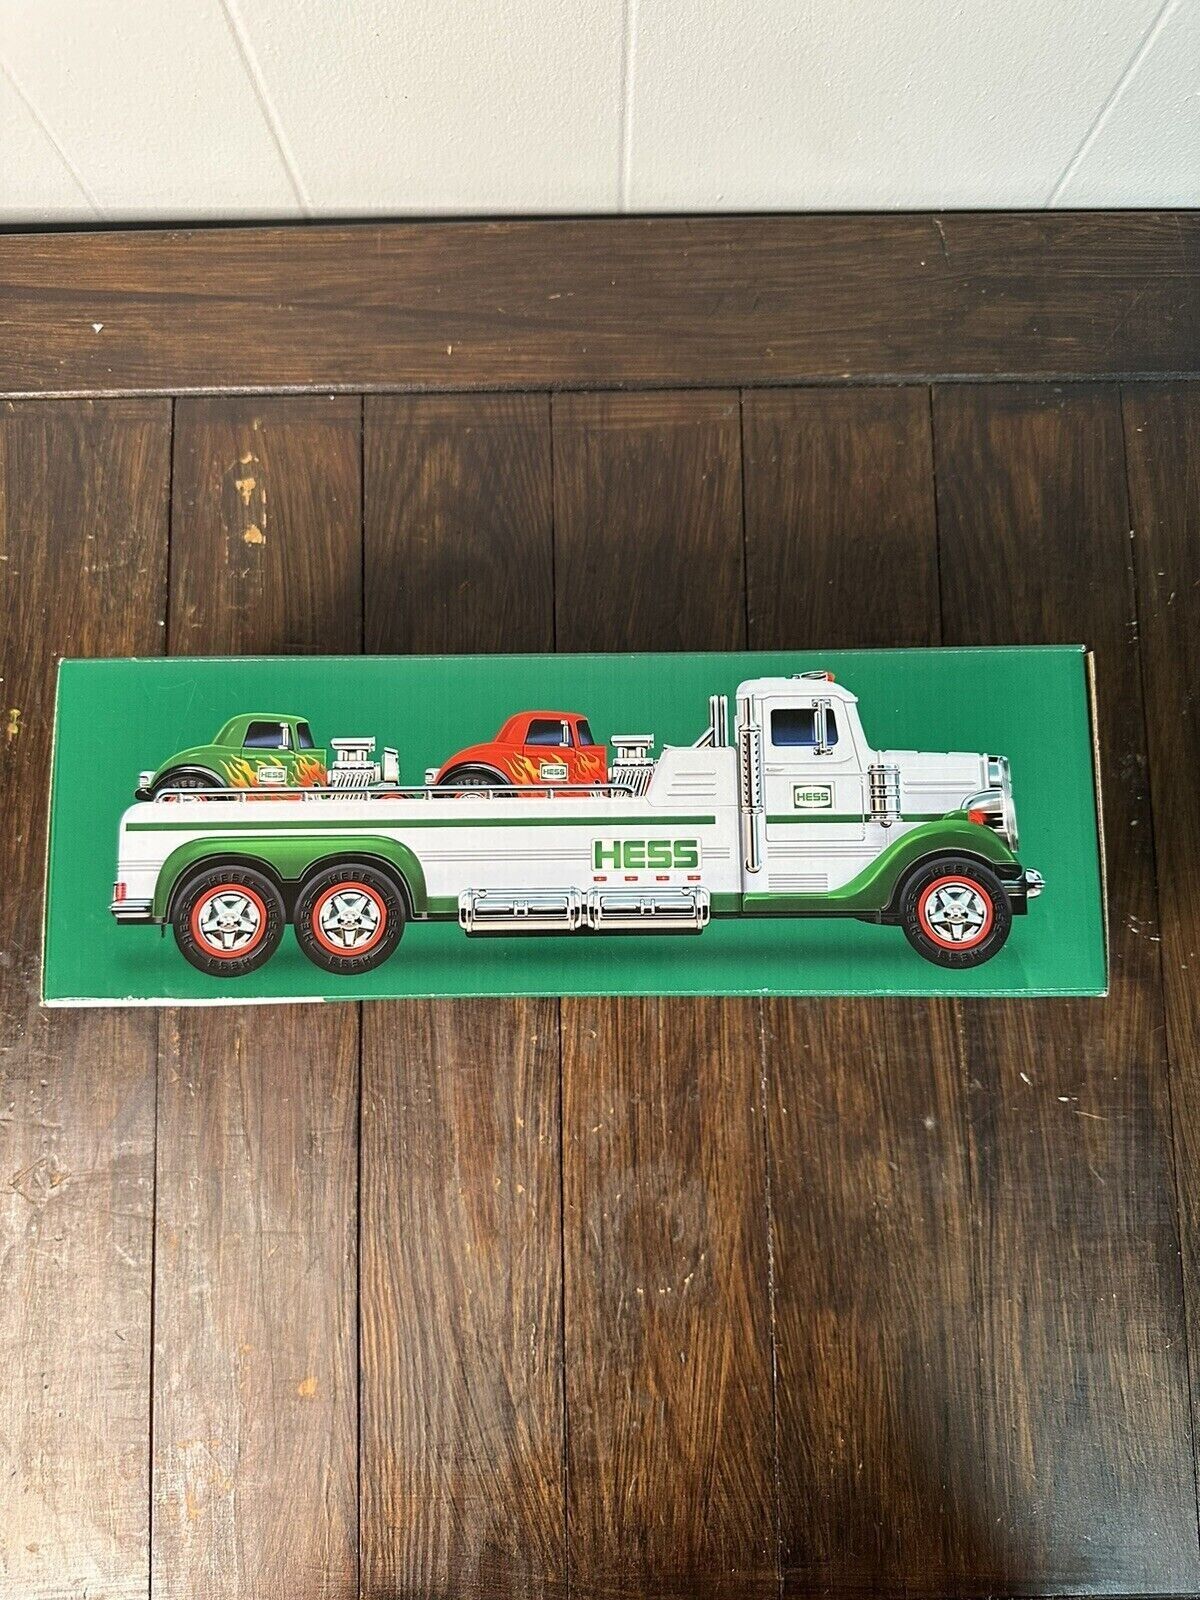 2022 Hess Toy Truck Flatbed With 2 Hot Rods-Brand New